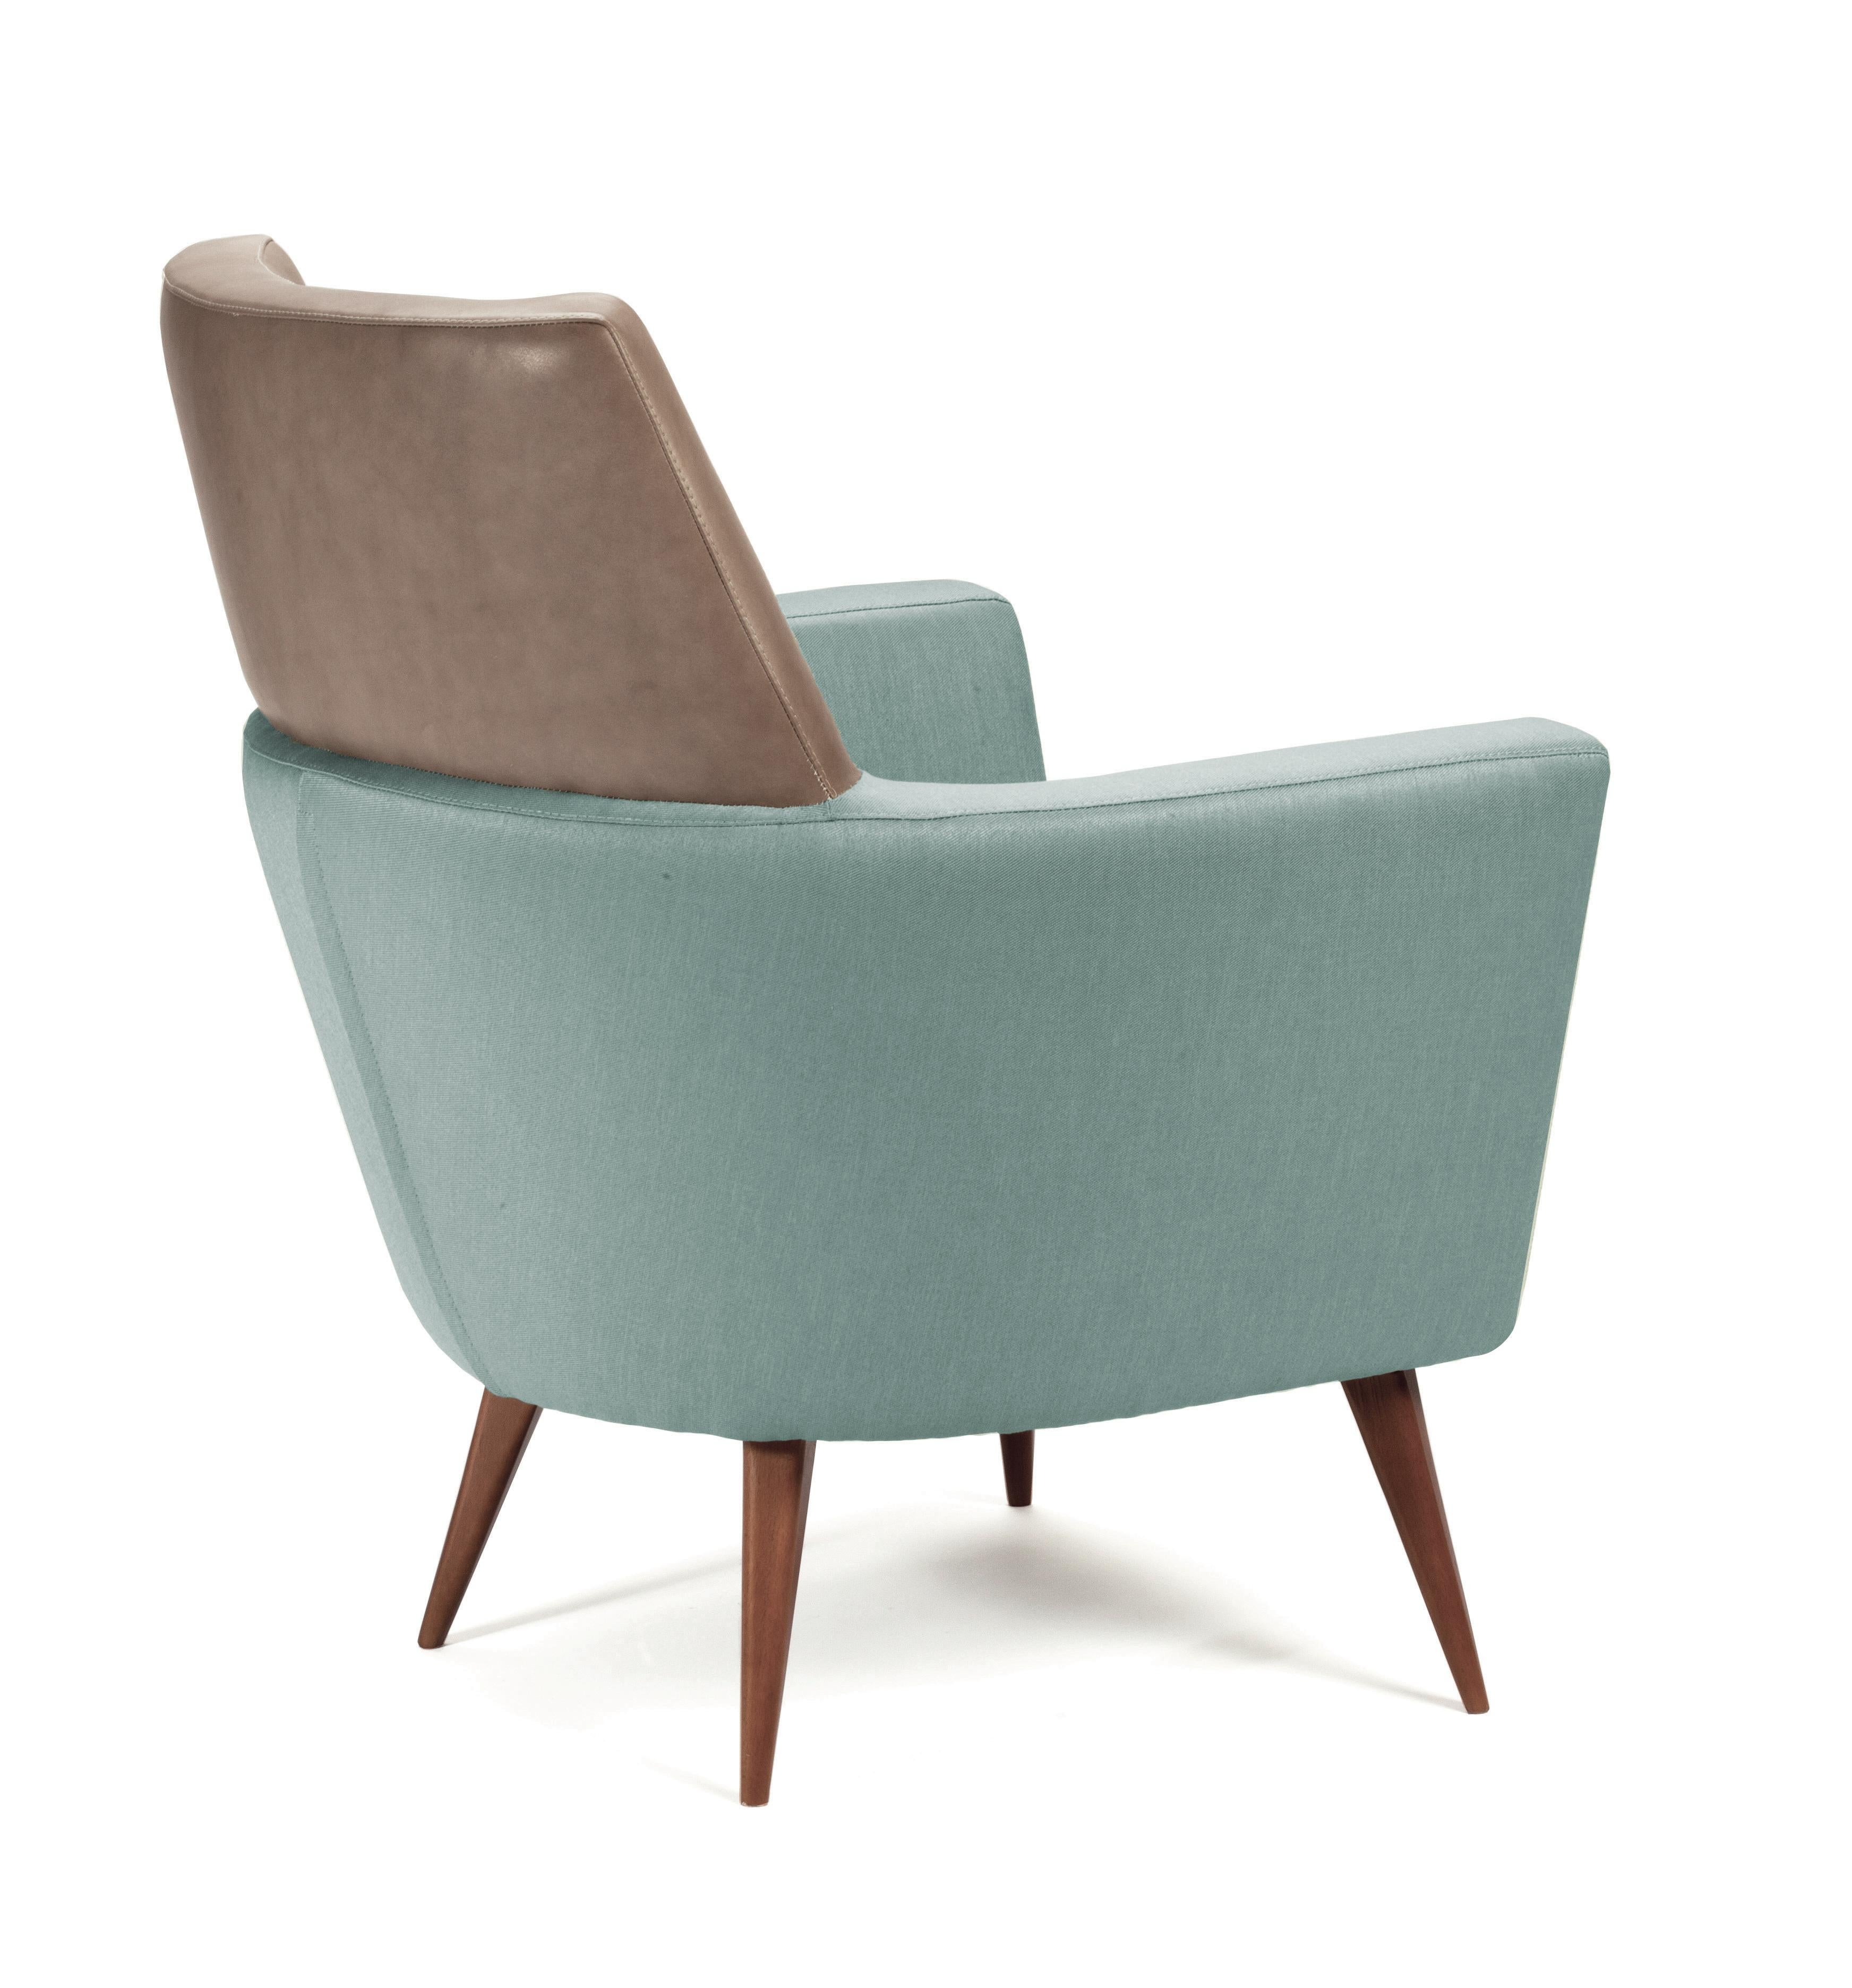 Round, smooth lines, with a combination of leather and fabric create the delicate balance of Doble armchair that stand on copper fittings. A spirit of class and tranquillity emanates from this comfortable armchair. Materials were chosen carefully